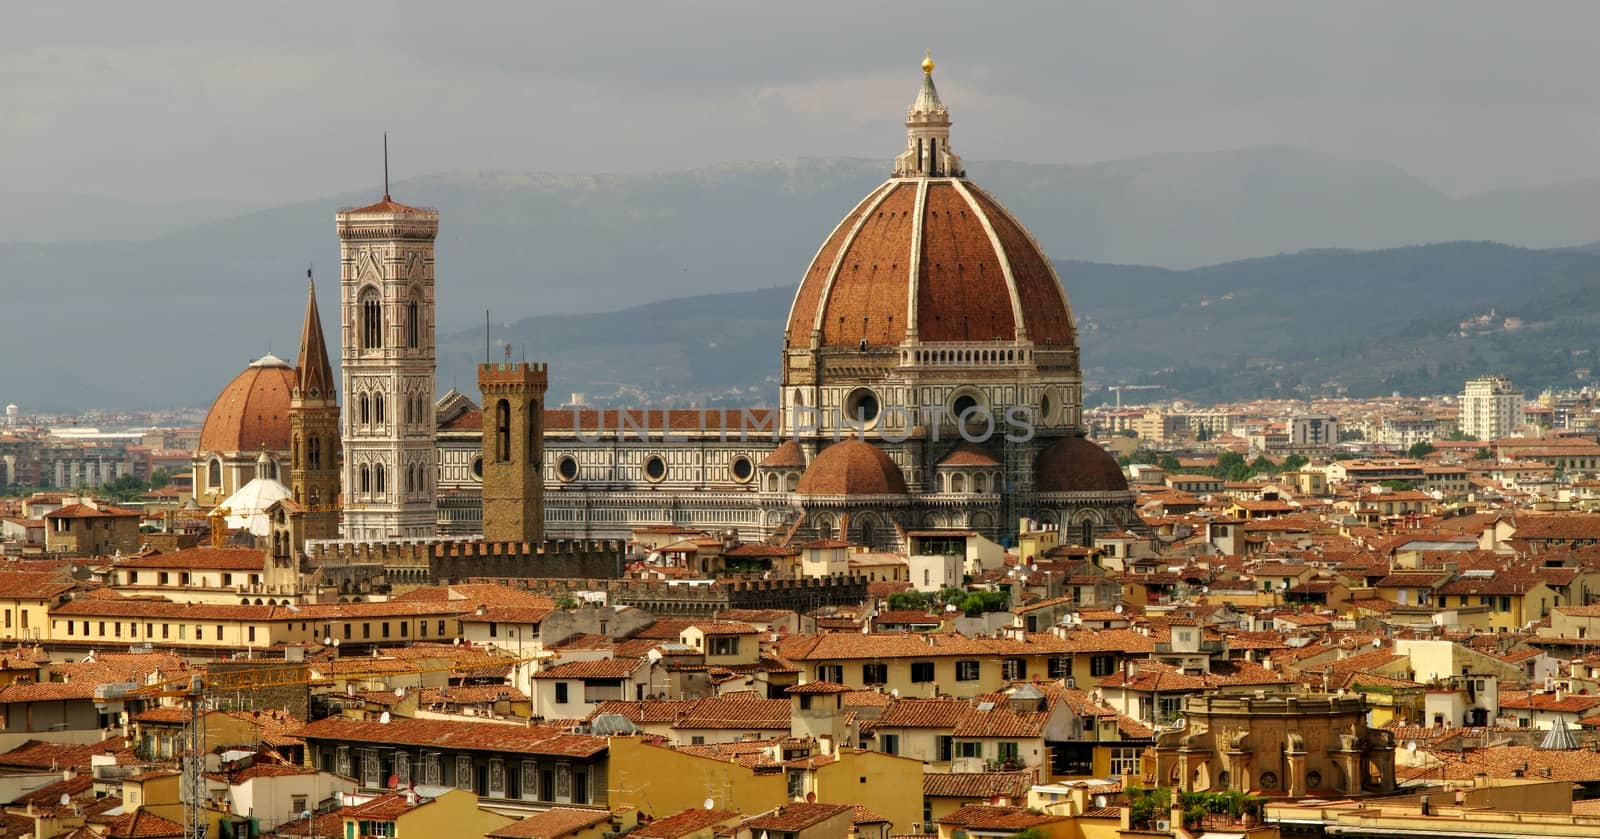 Florence  Cathedral  Basilica   of Saint Mary of the Flower